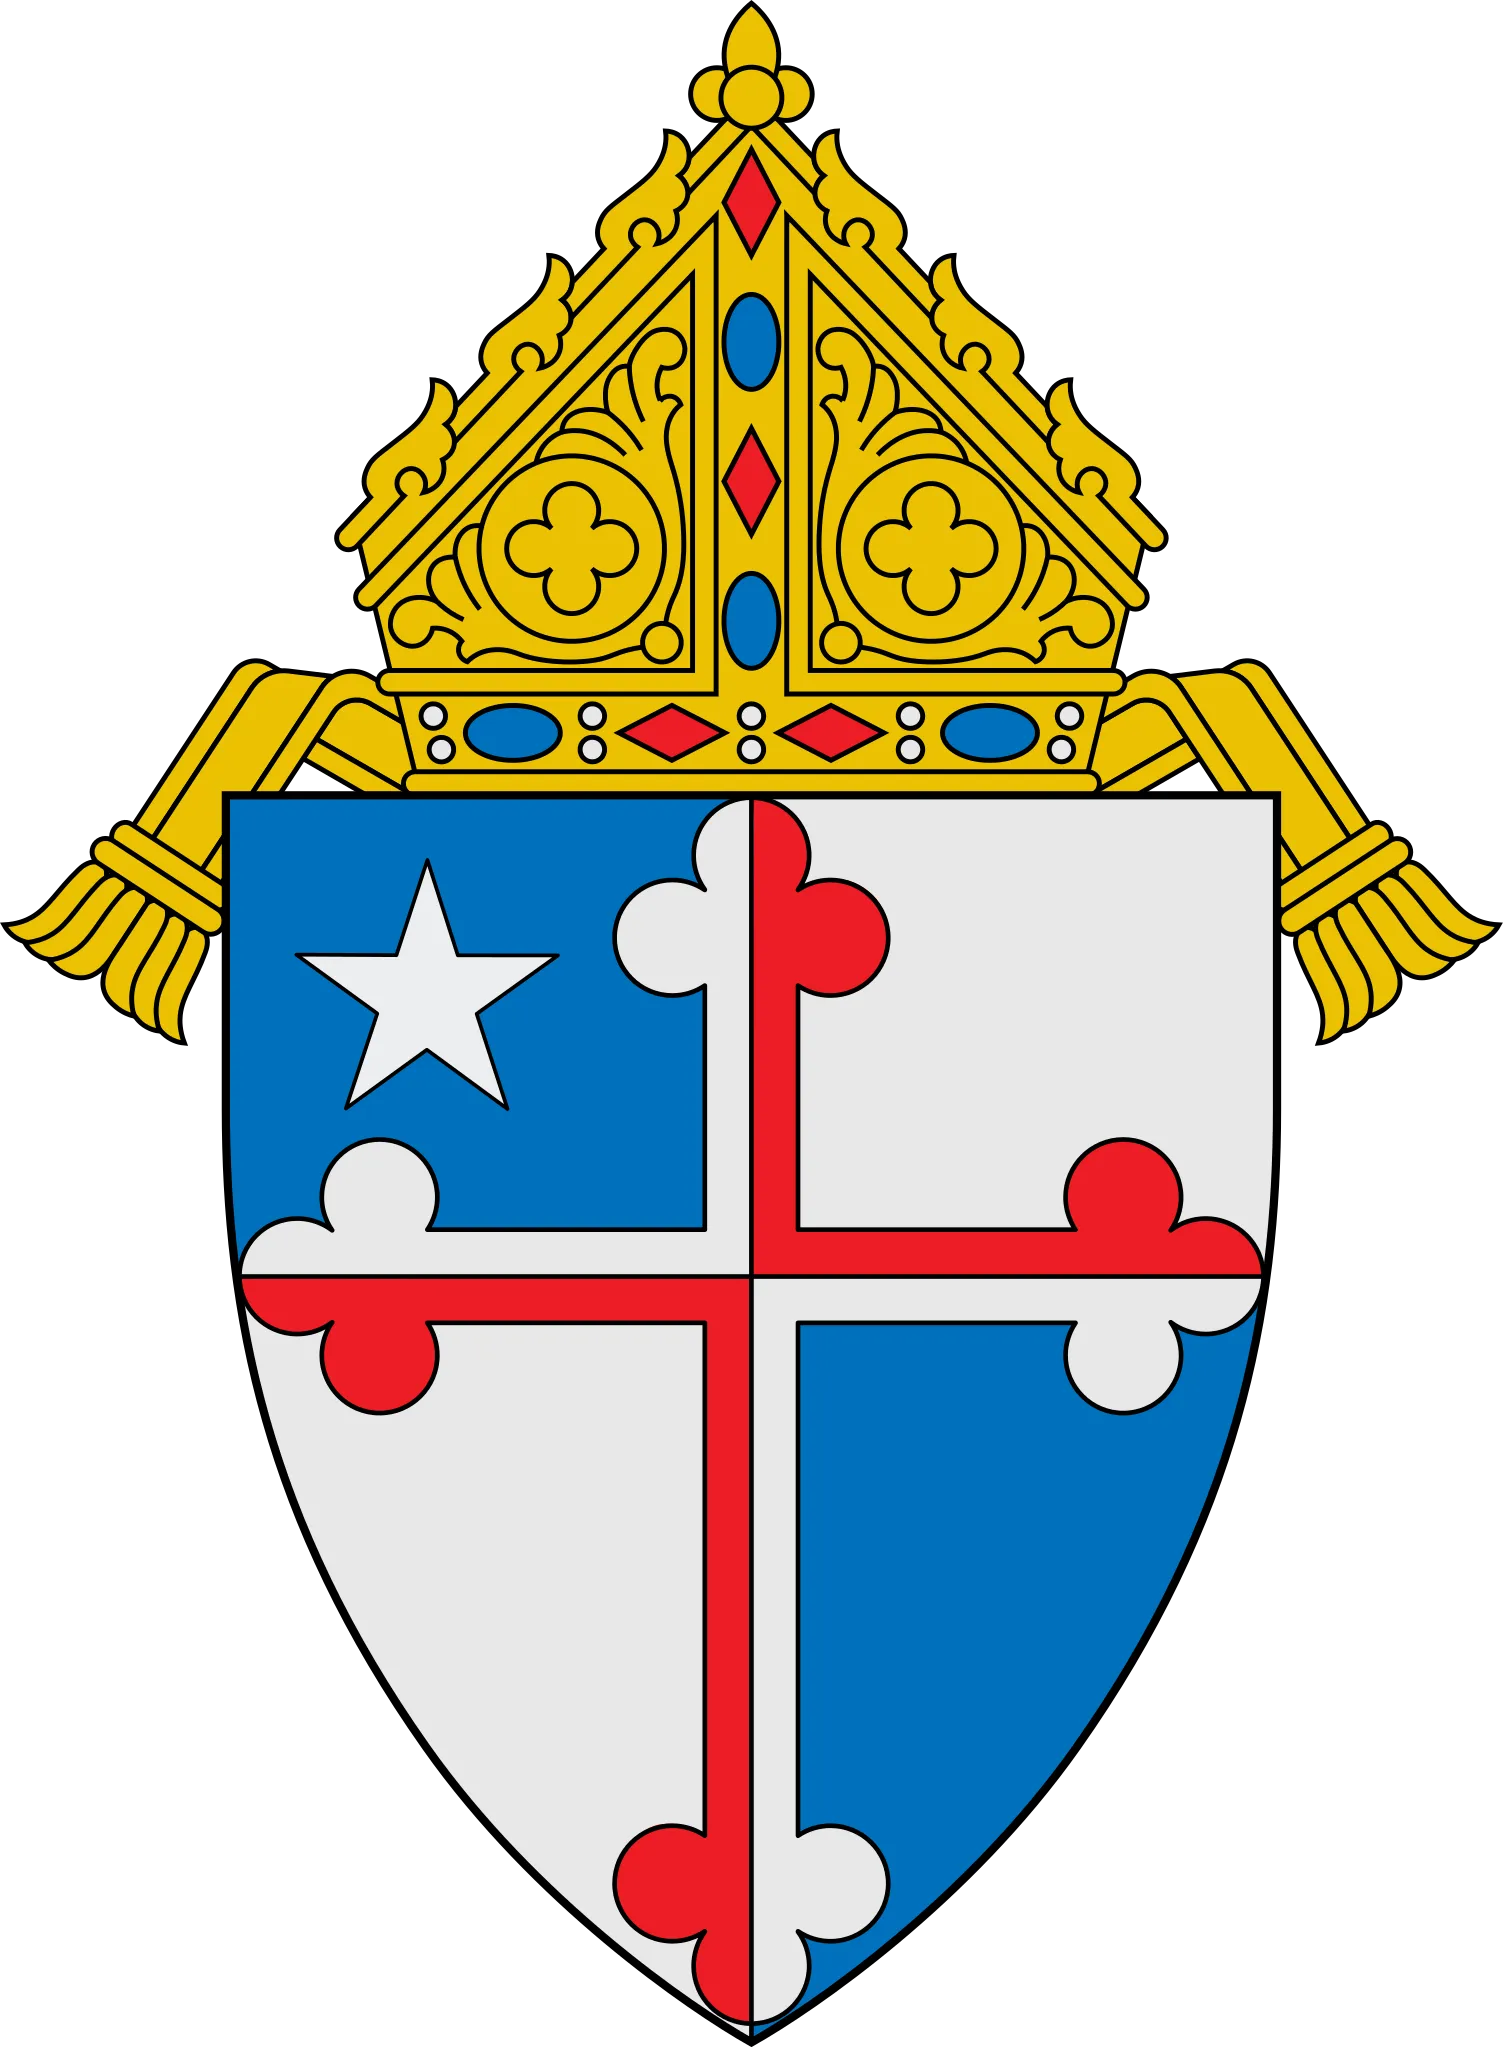 The Arms of the Archdiocese of Baltimore